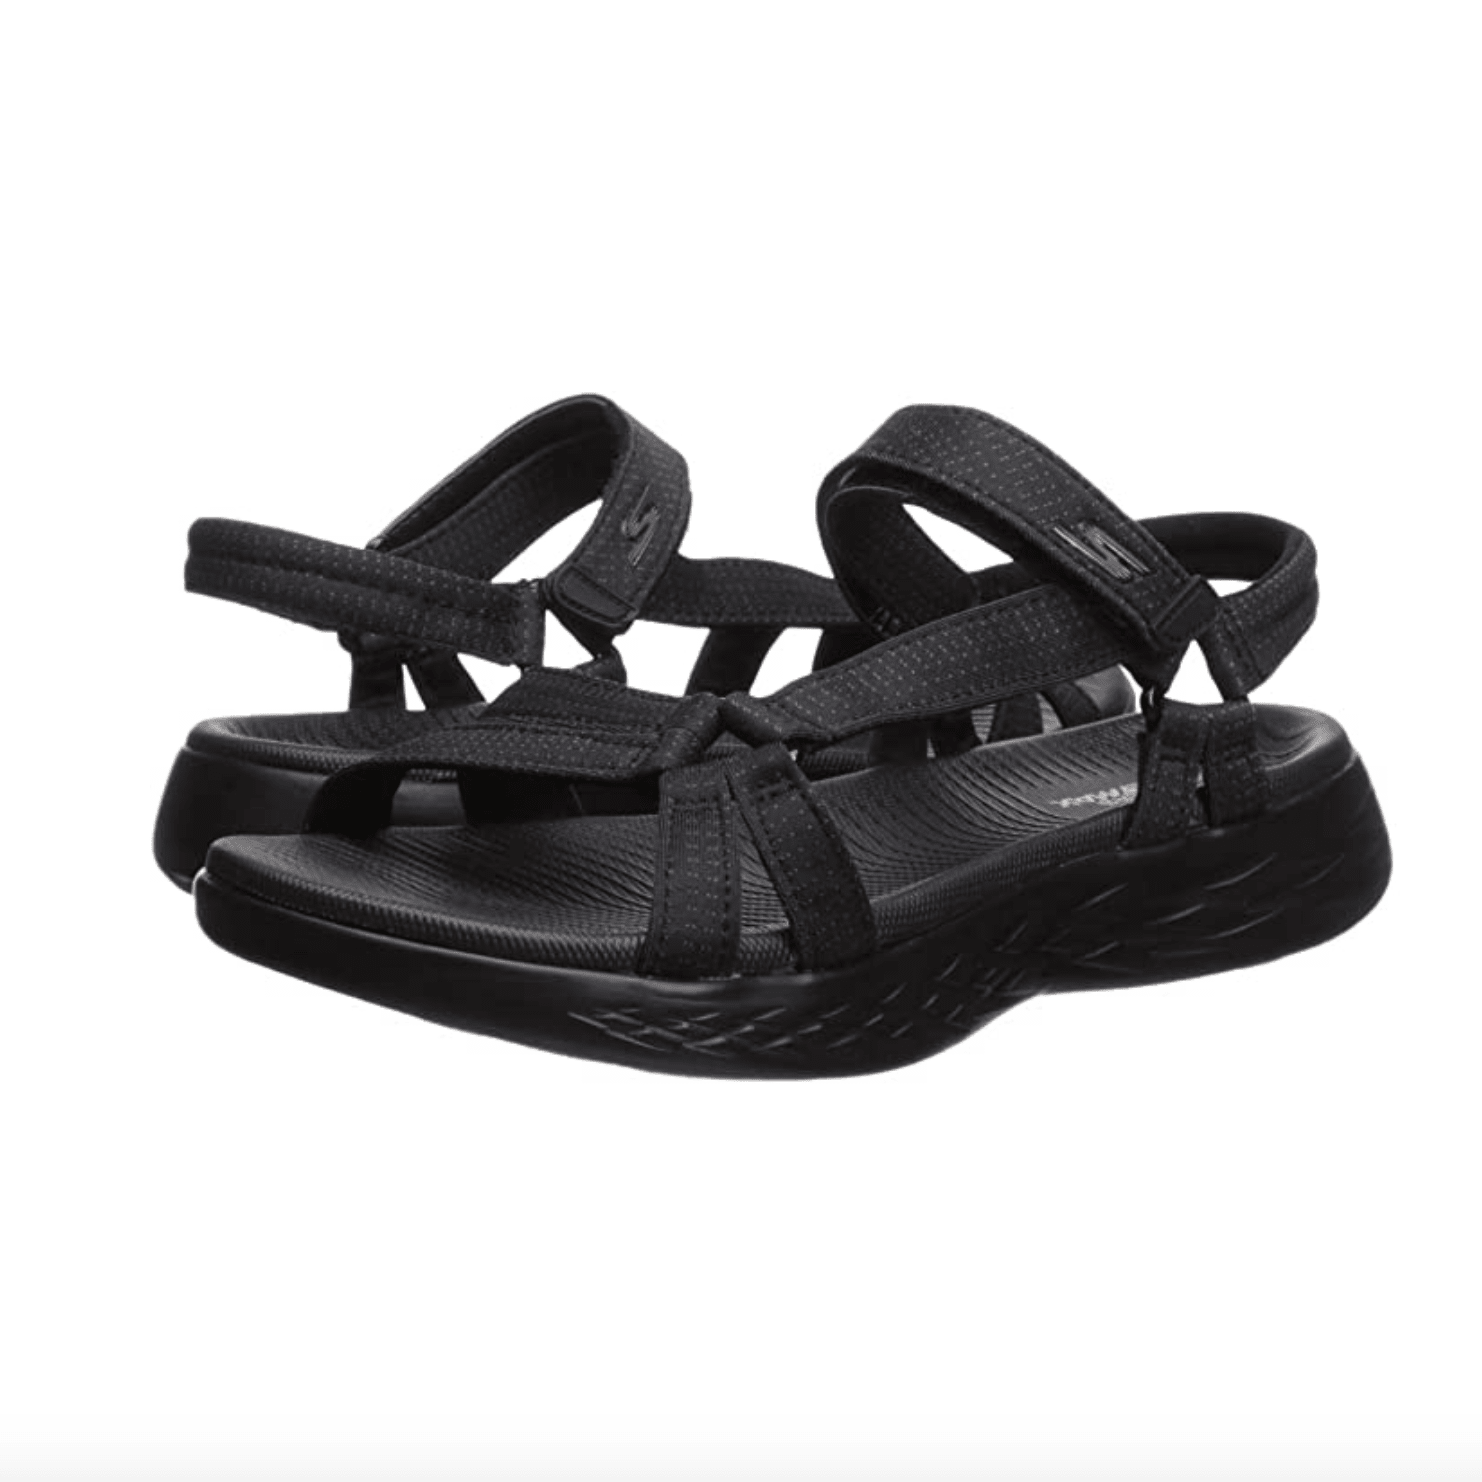 caja de cartón juego Estereotipo The Skechers On The Go sandals are podiatrist-approved and on sale